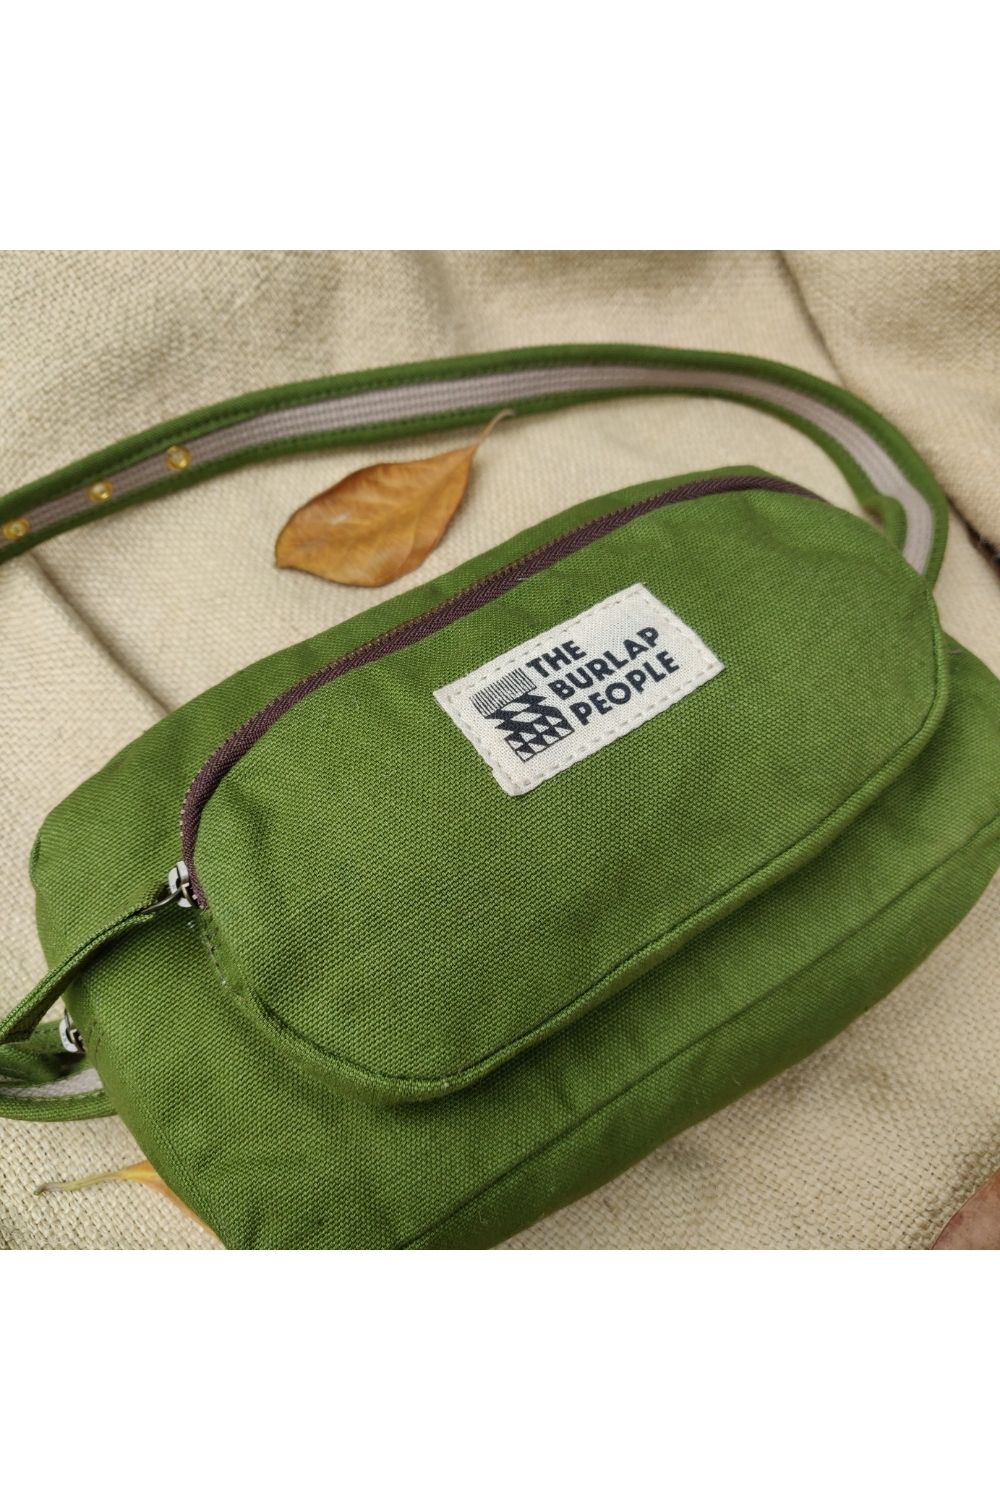 The Travel Light Pack Apparel & Accessories The Burlap People Moss Green 